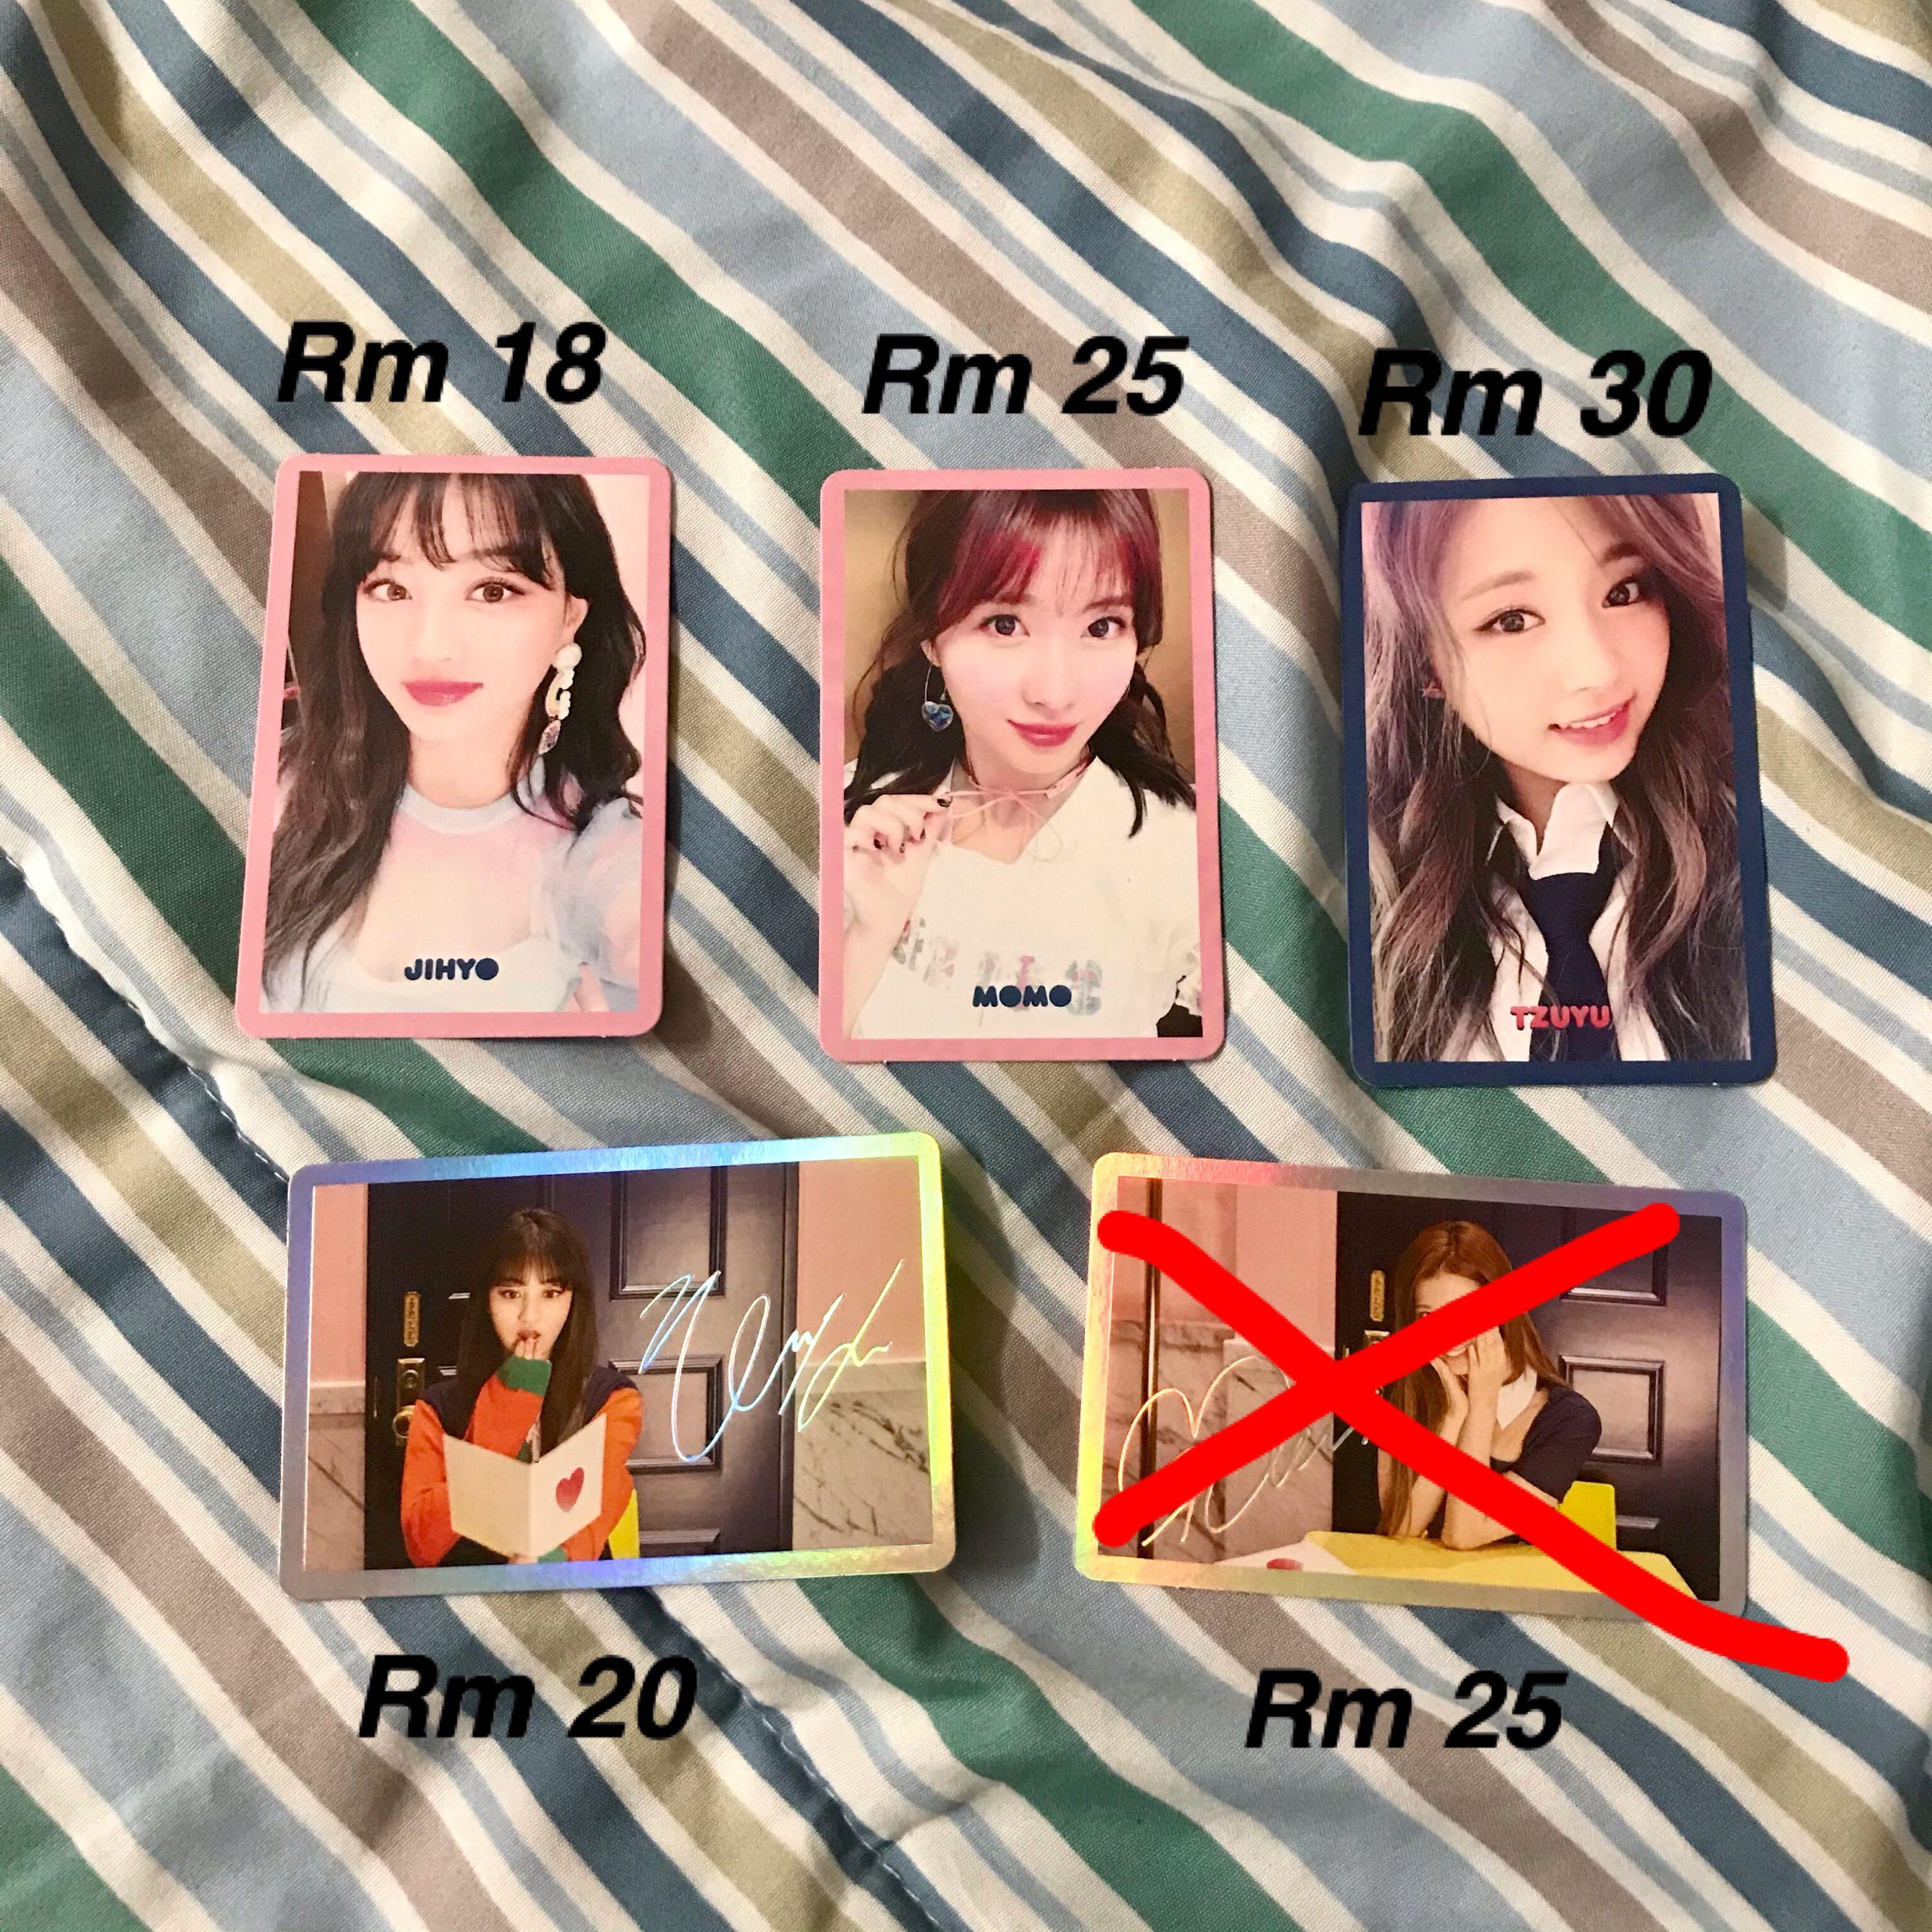 Wts Twice Signal Photocard K Wave On Carousell